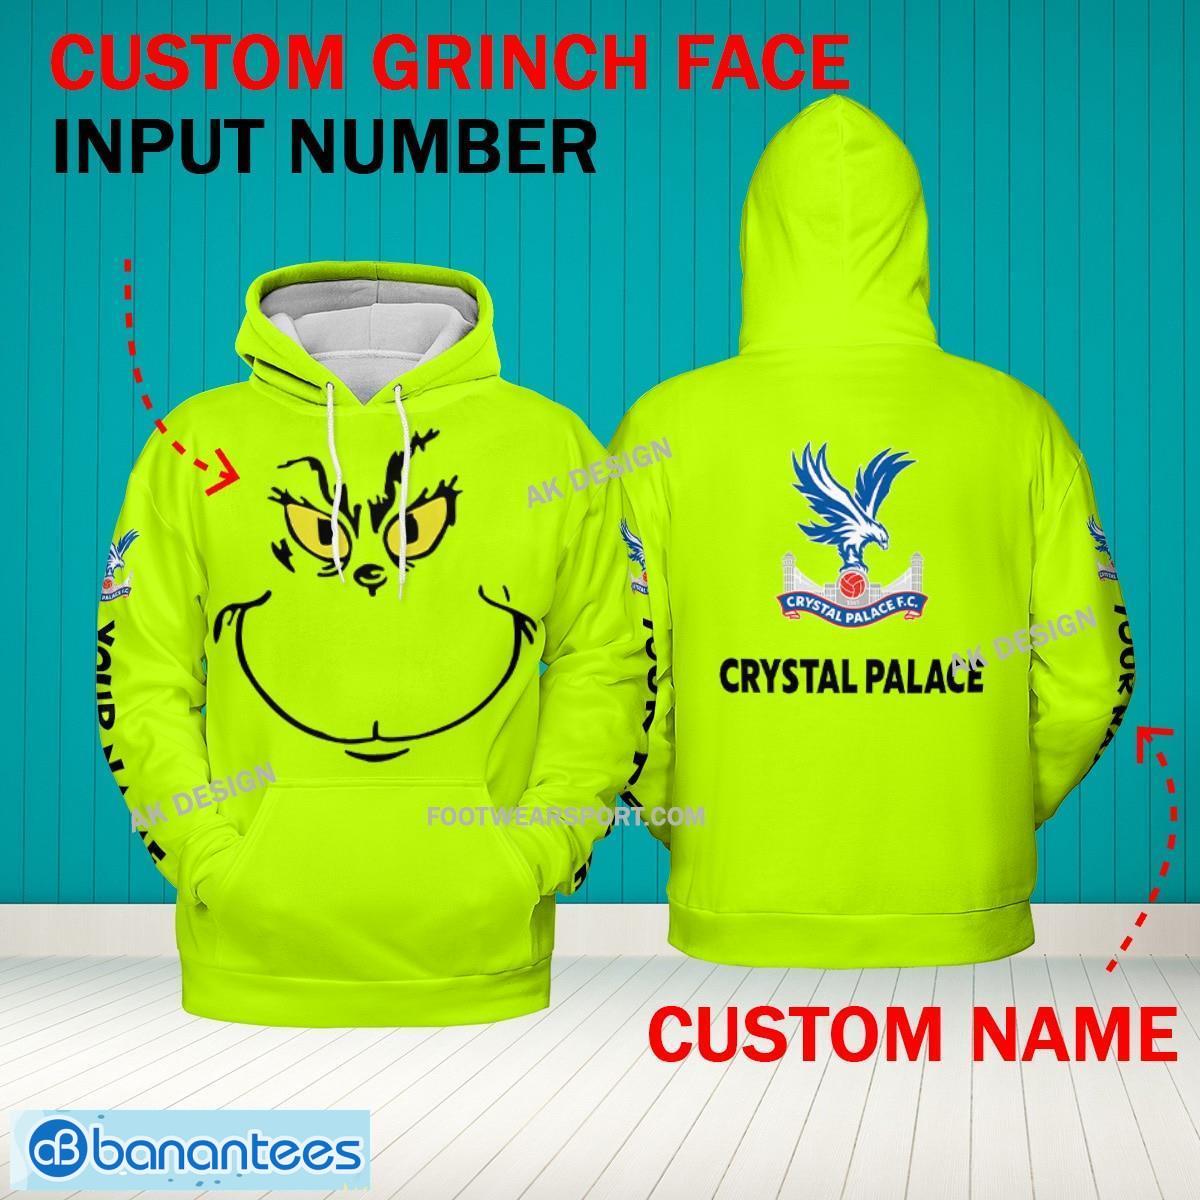 Grinch Face Crystal Palace 3D Hoodie, Zip Hoodie, Sweater Green AOP Custom Number And Name - Grinch Face EPL Crystal Palace 3D Hoodie